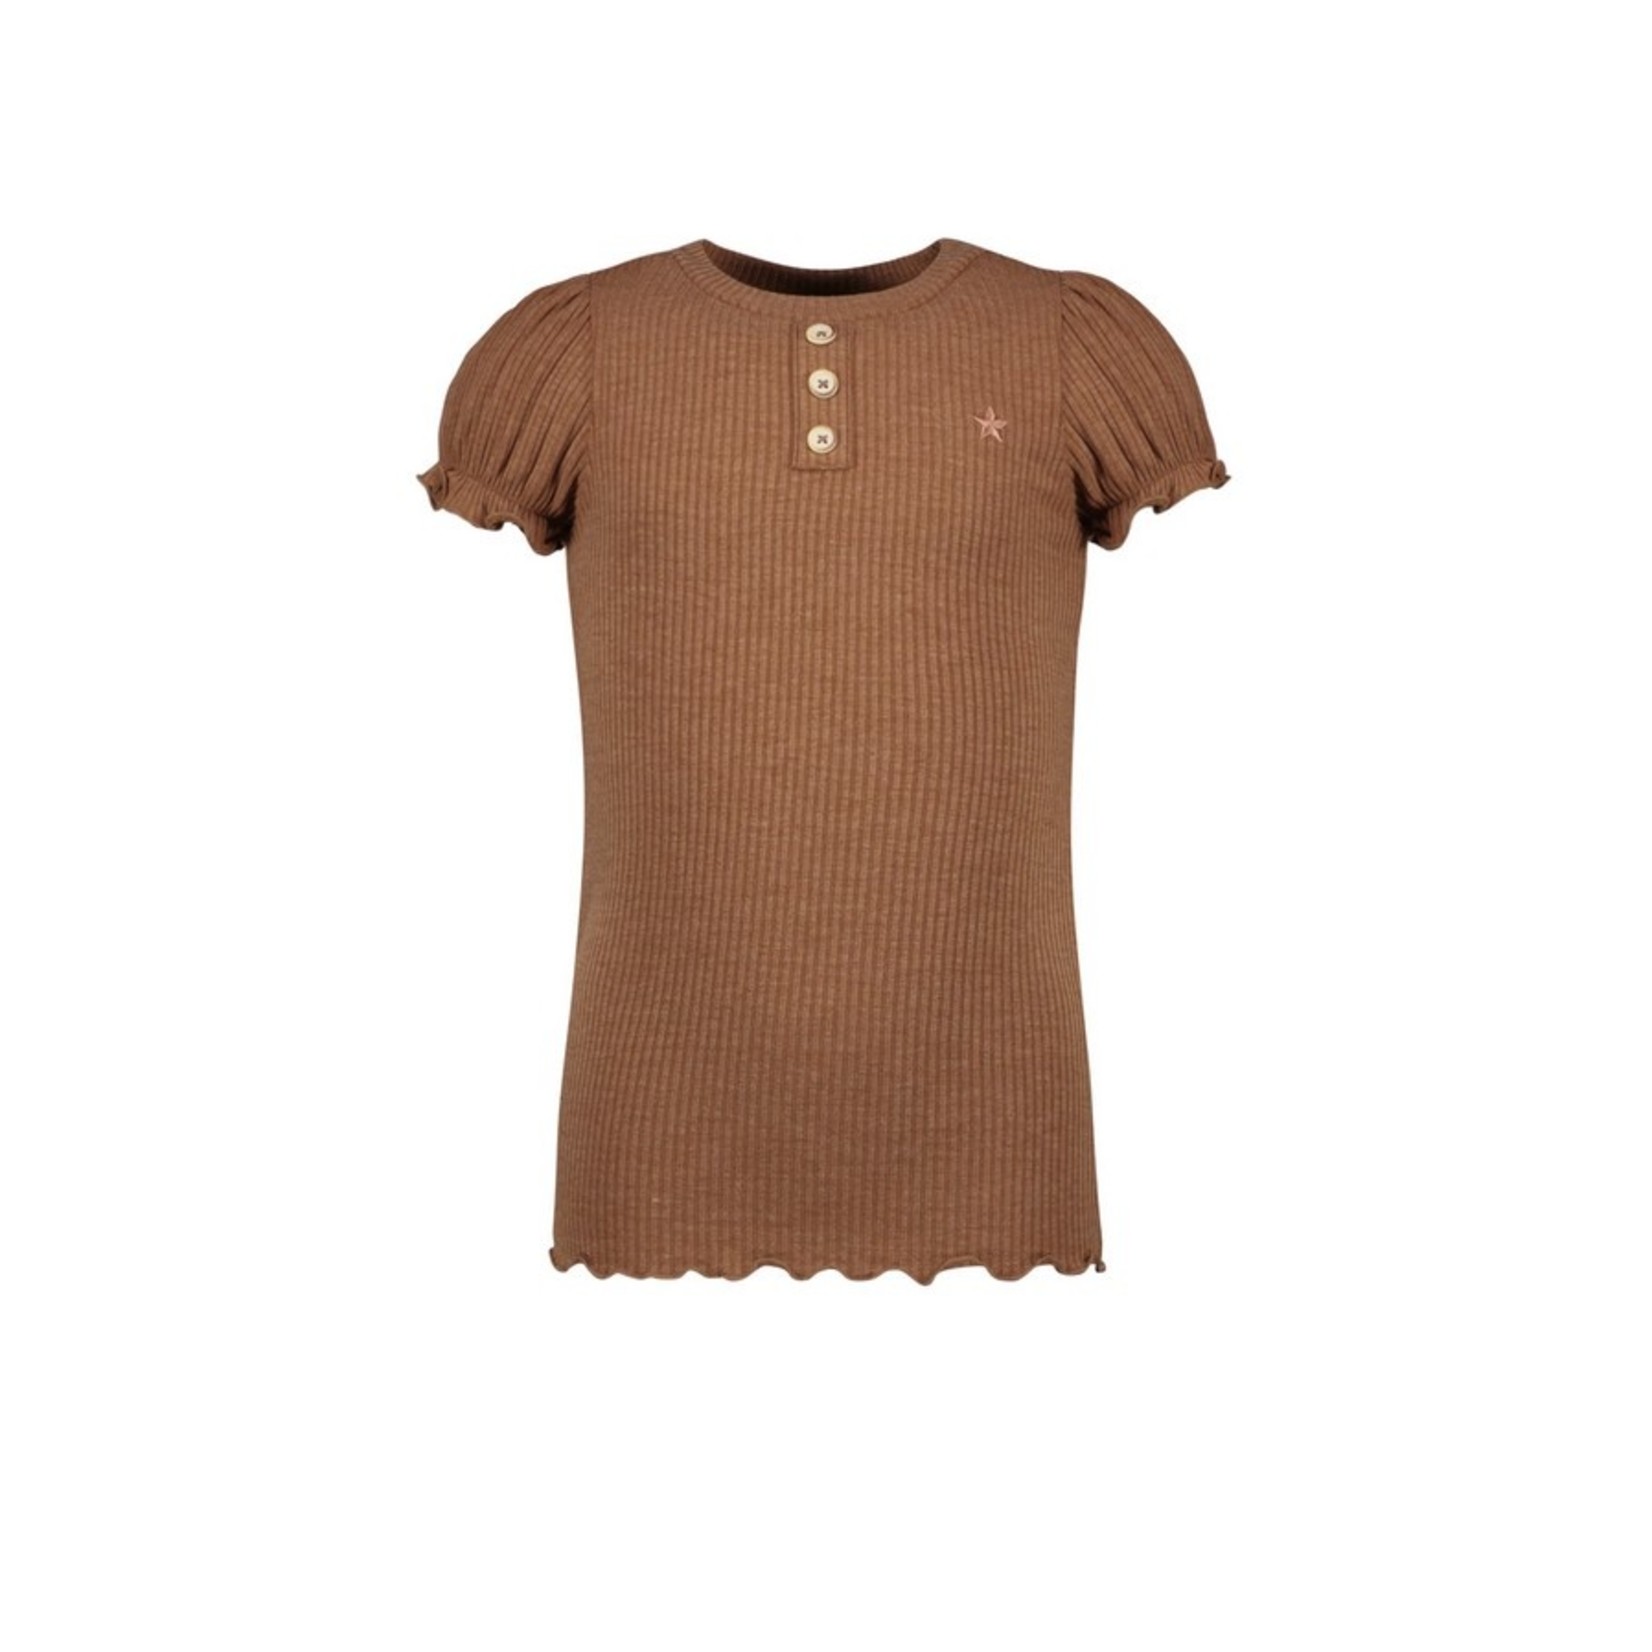 Like FLO Flo girls solid rib ss tee with button closure Toffee